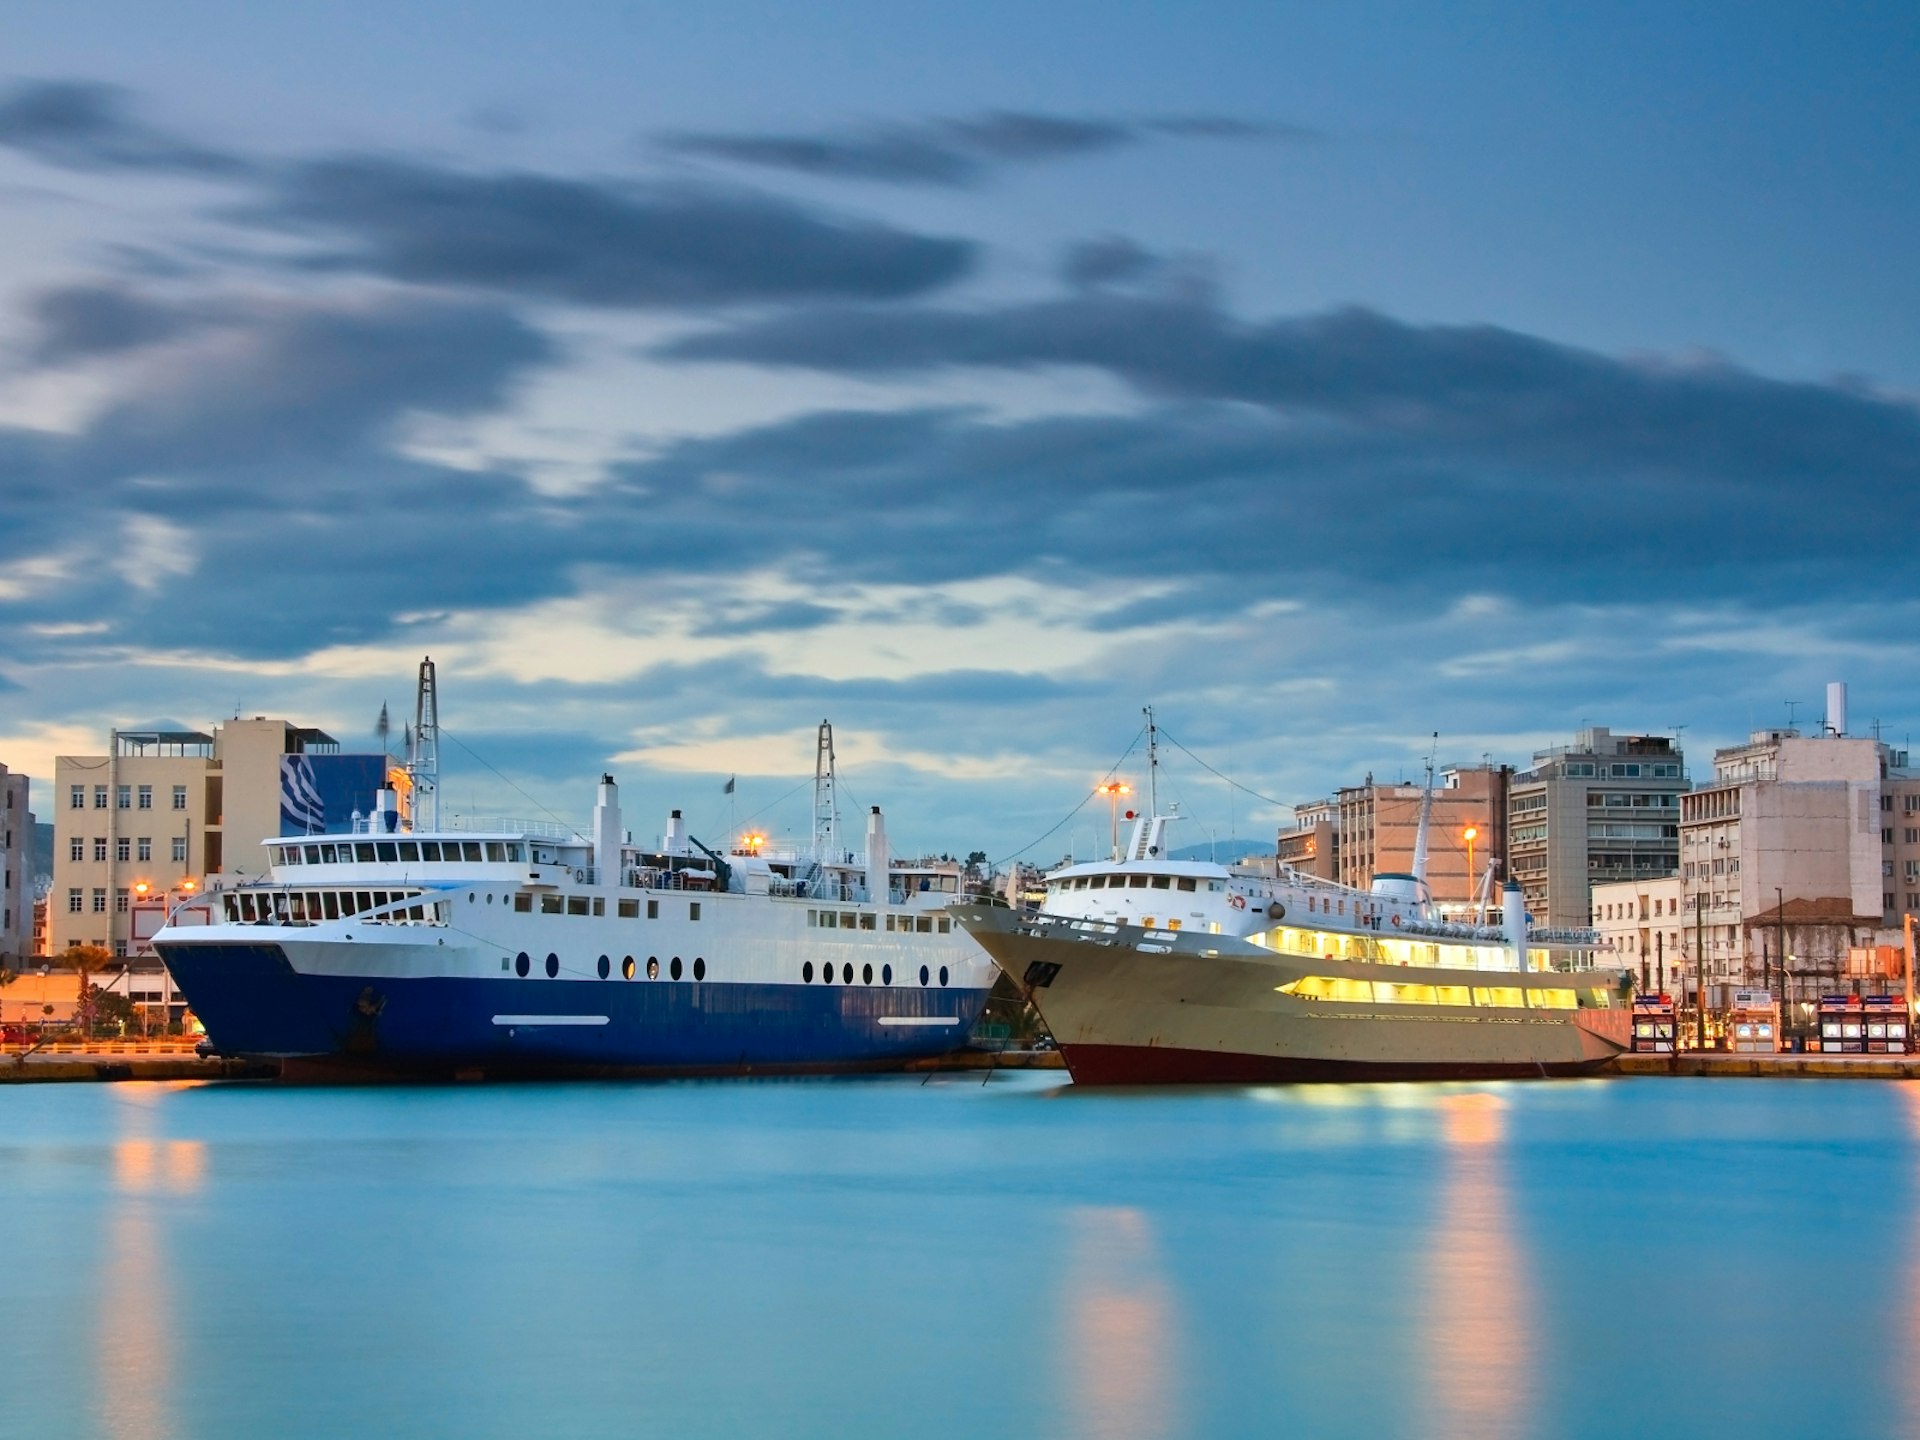 Two large ferries in the port of Piraeus, Greece